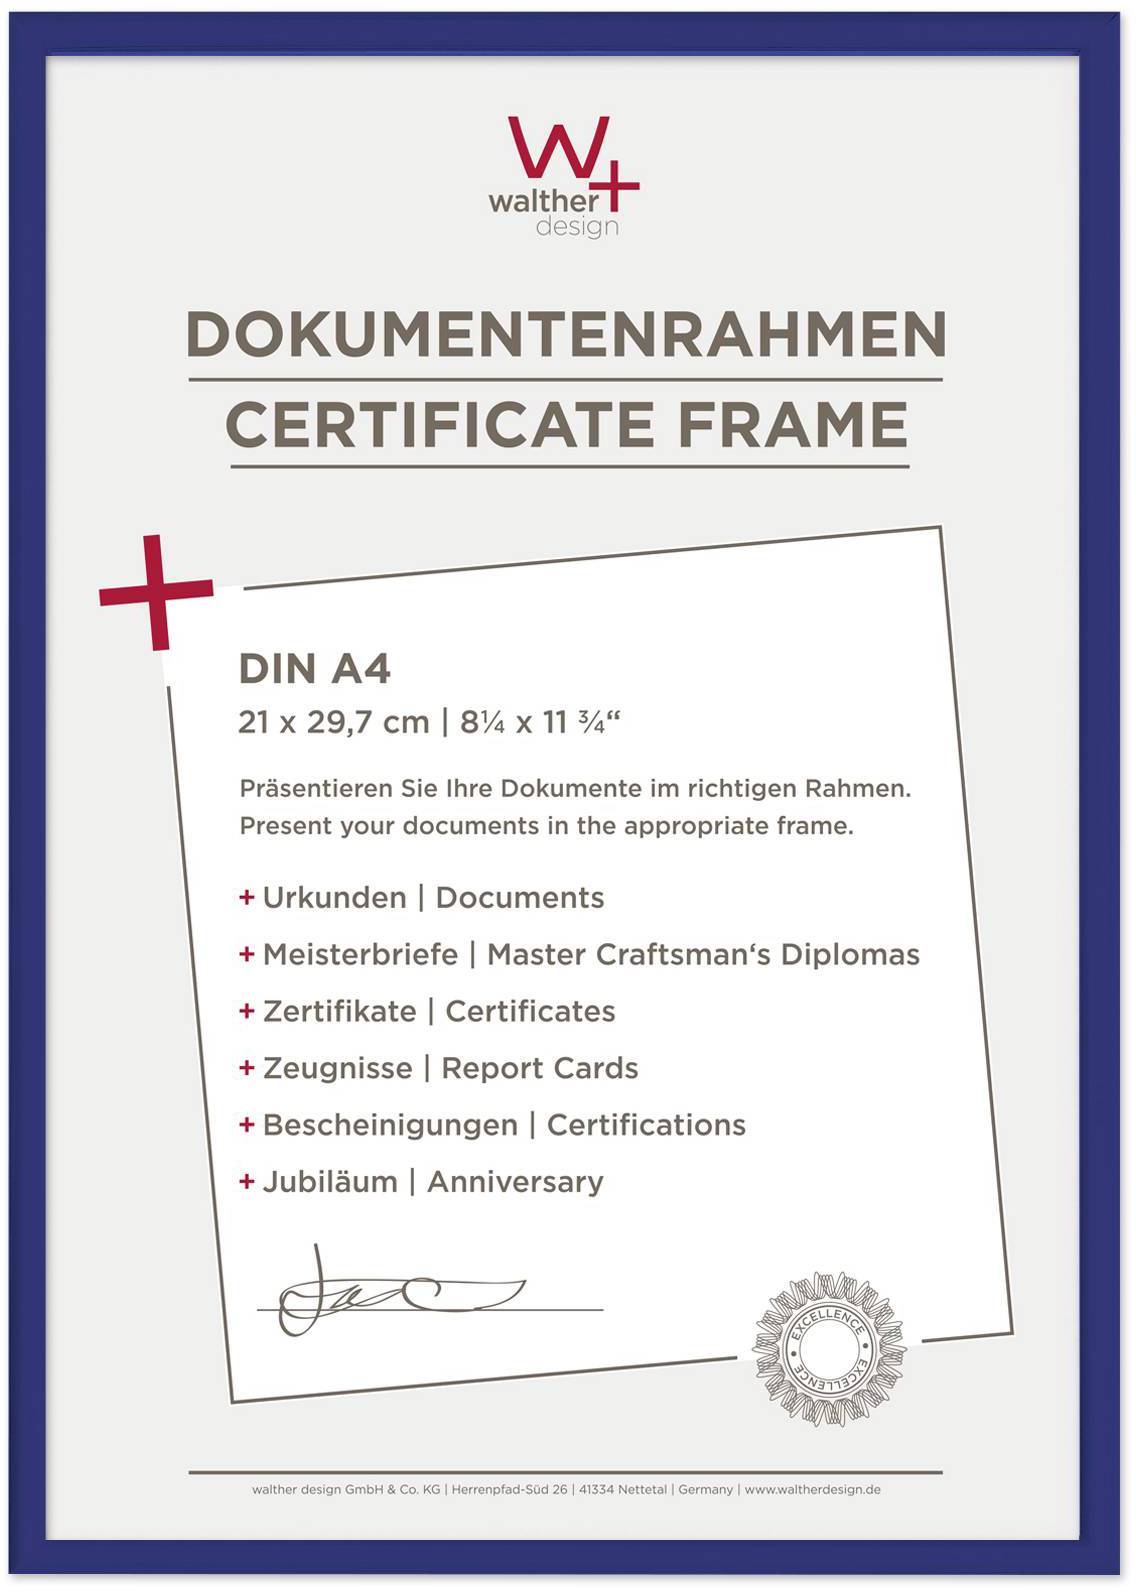 Walther Design Blue Certificate Frame RRP 9.99 CLEARANCE XL 5.99